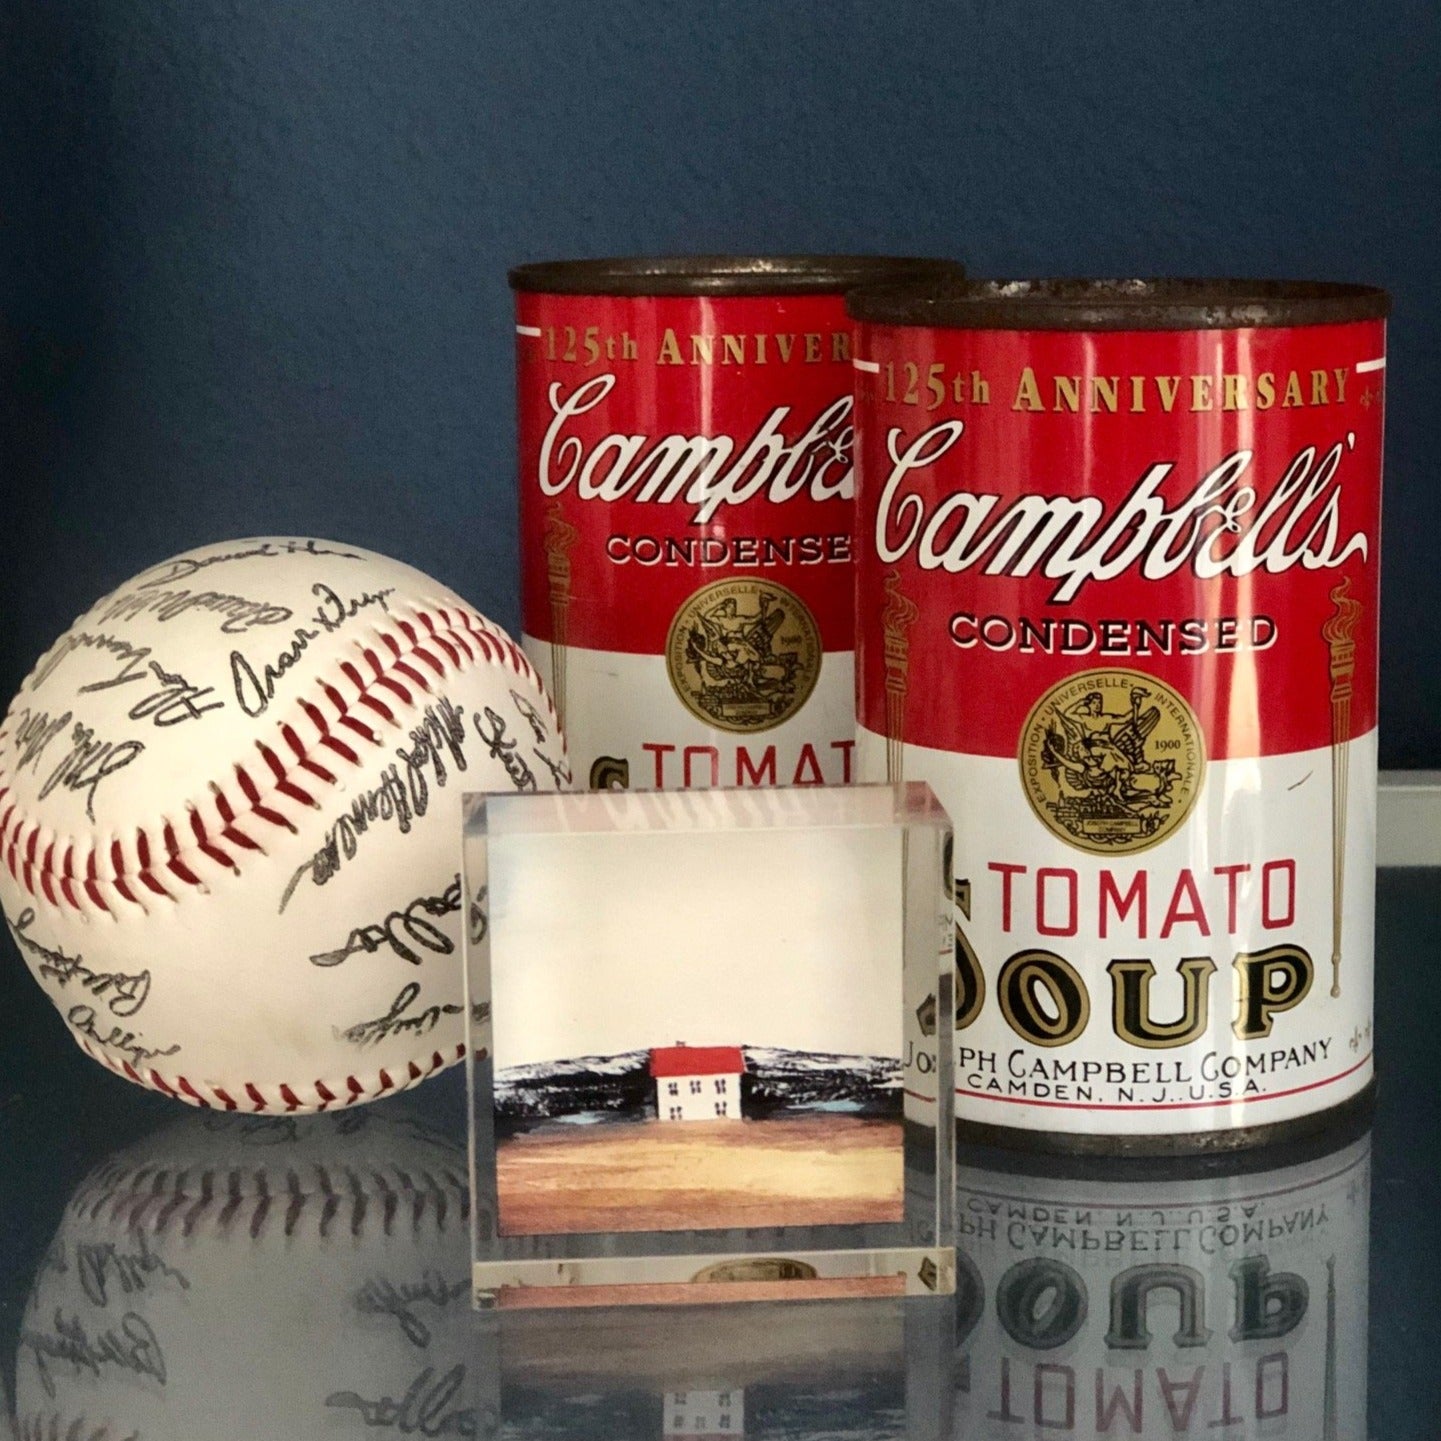 signed base ball with Campbell soup cans and art work